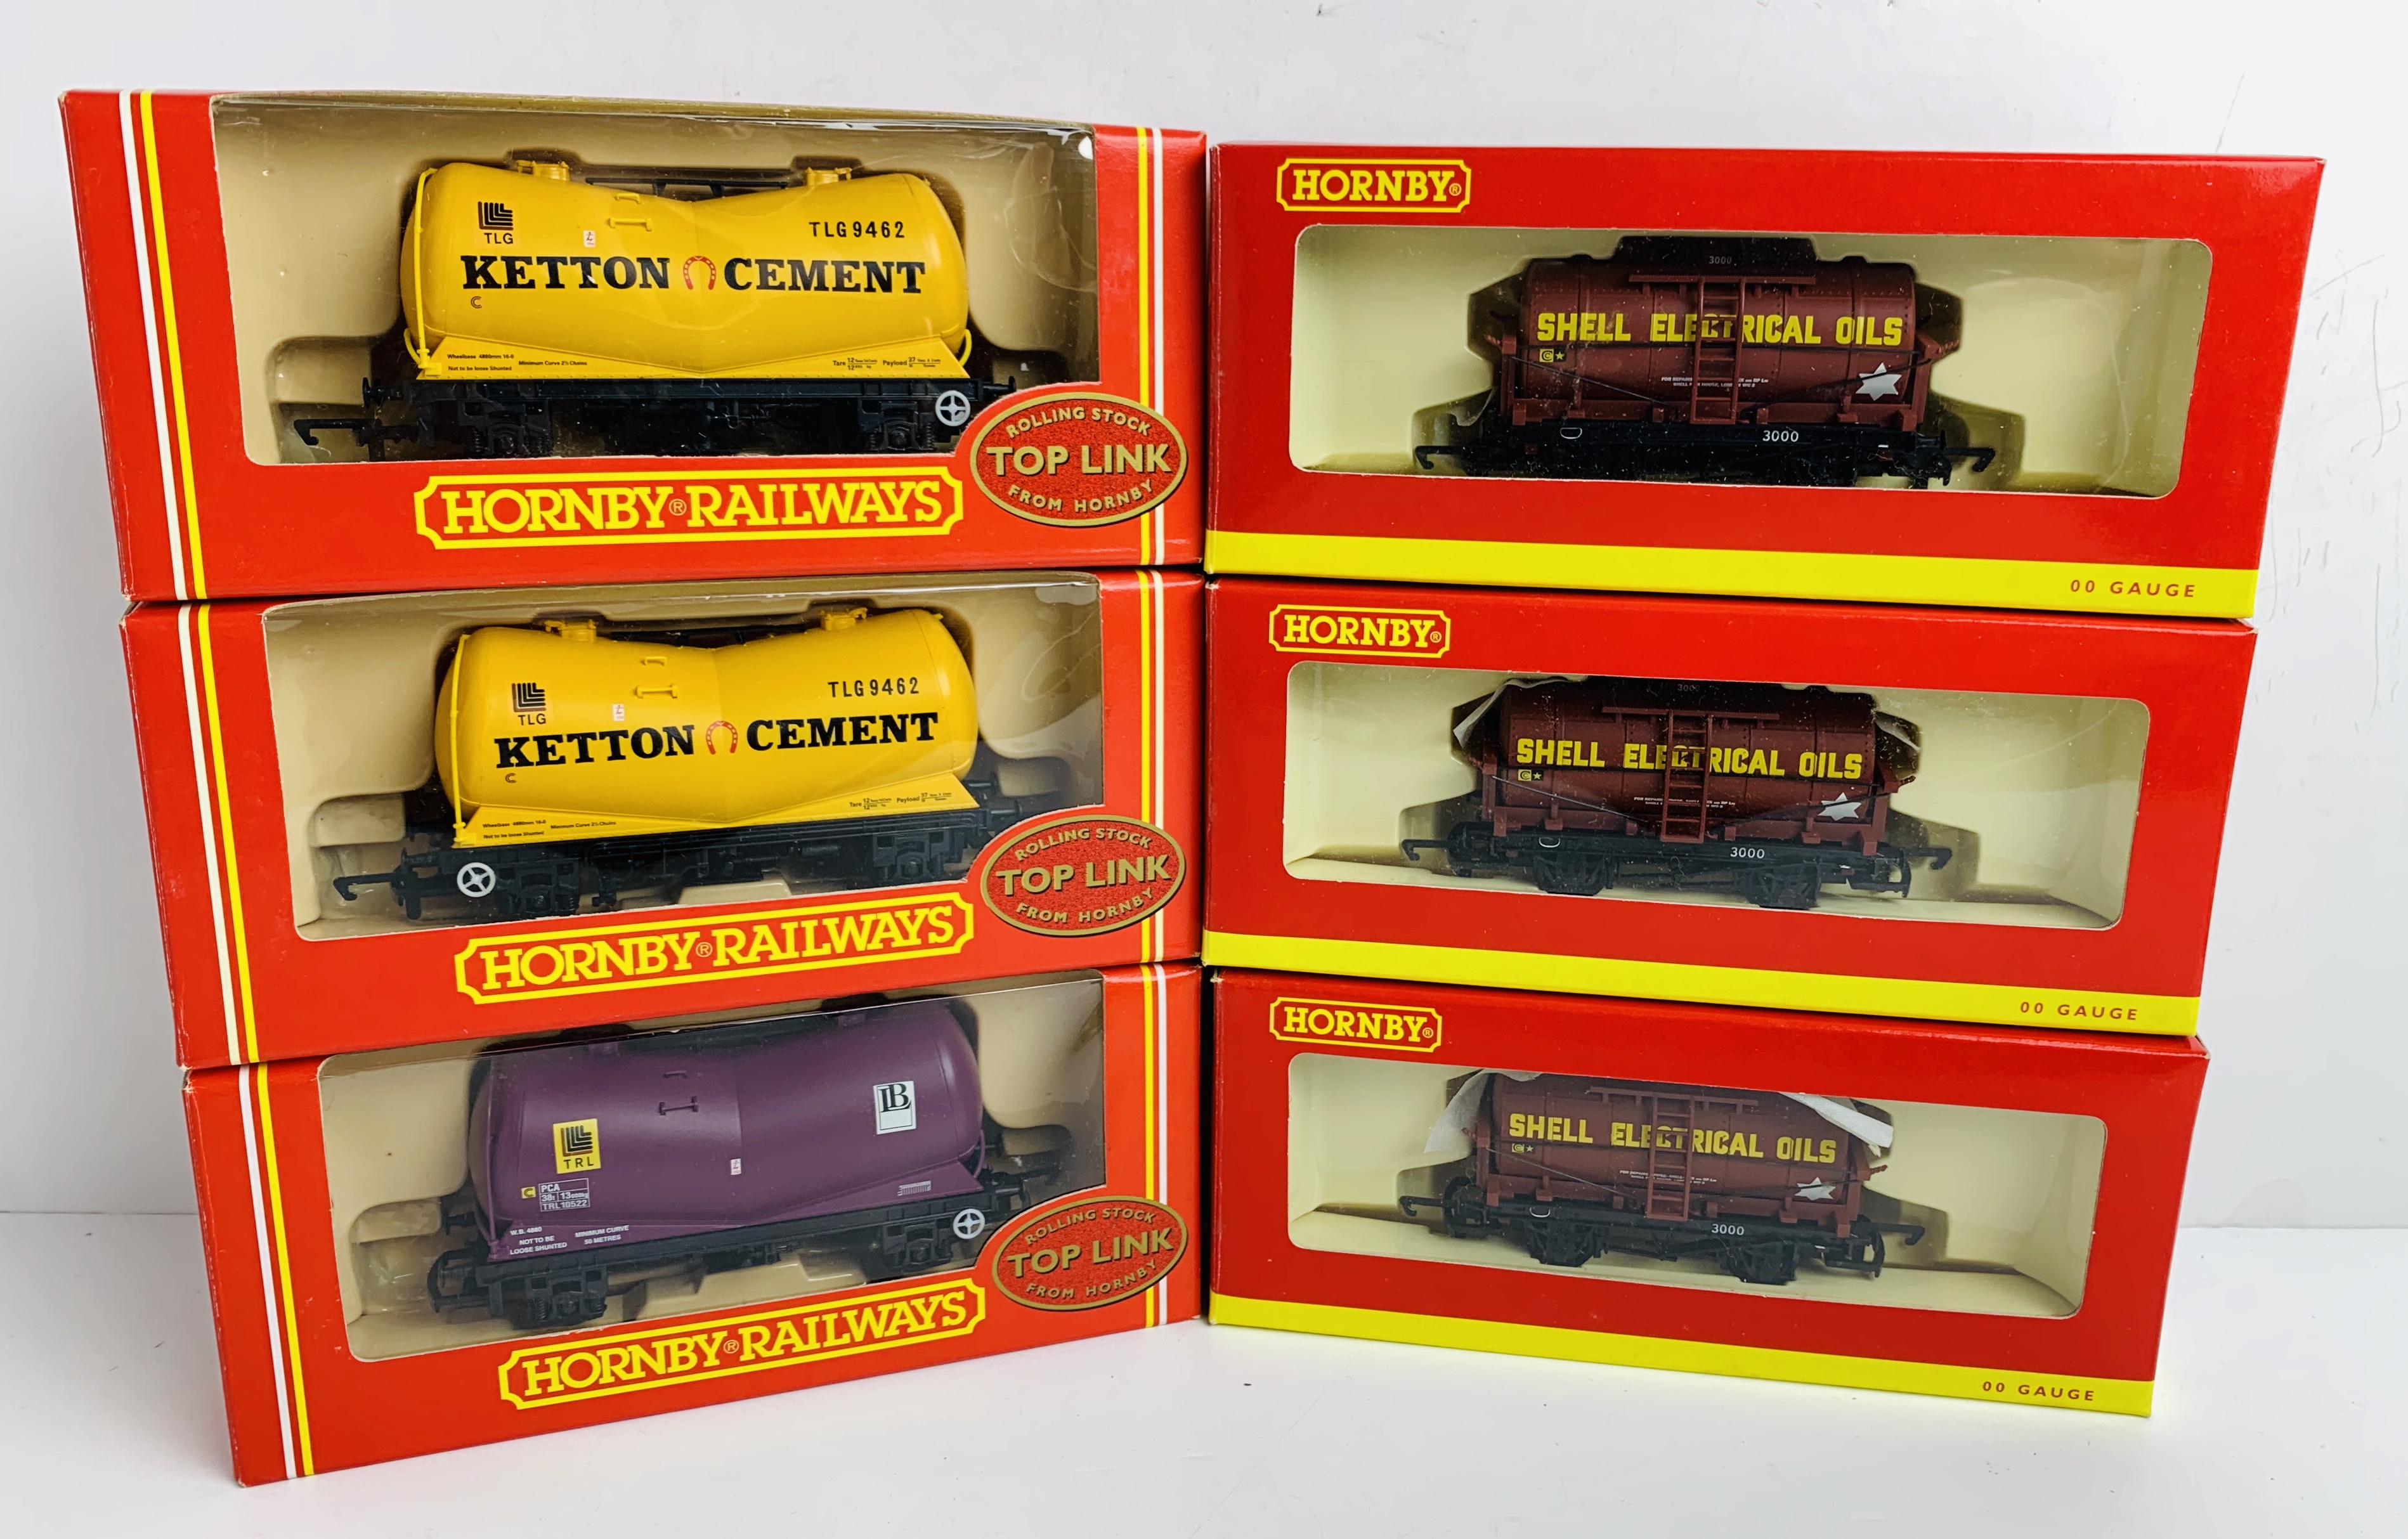 6x Hornby OO Gauge Wagons - To include: 2x R6027 Ketton Cement Vee Tanker, 1x R6026 Lever Bros, 3x